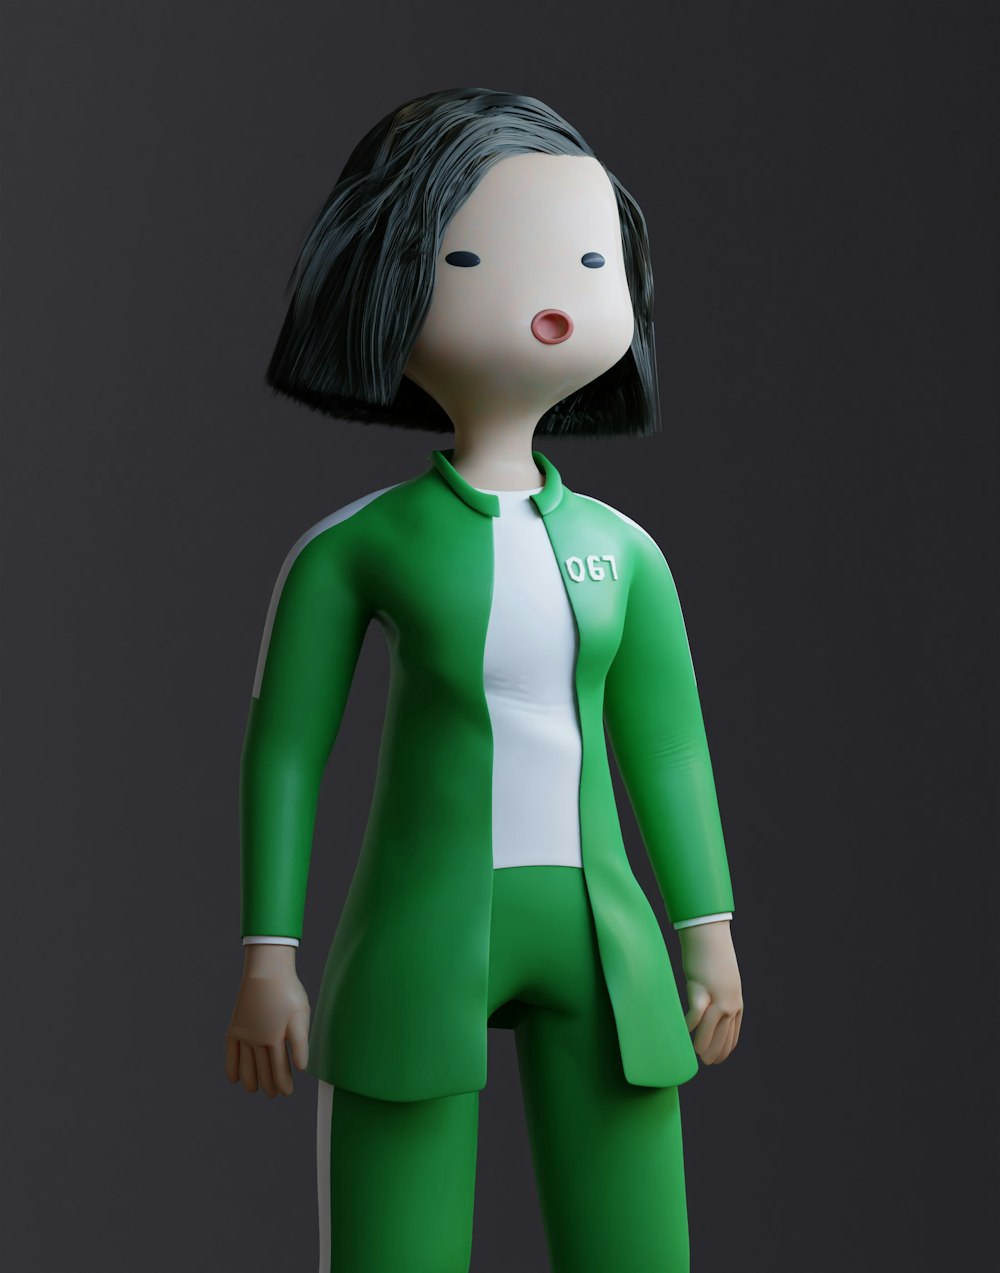 a doll with a green suit and white shirt